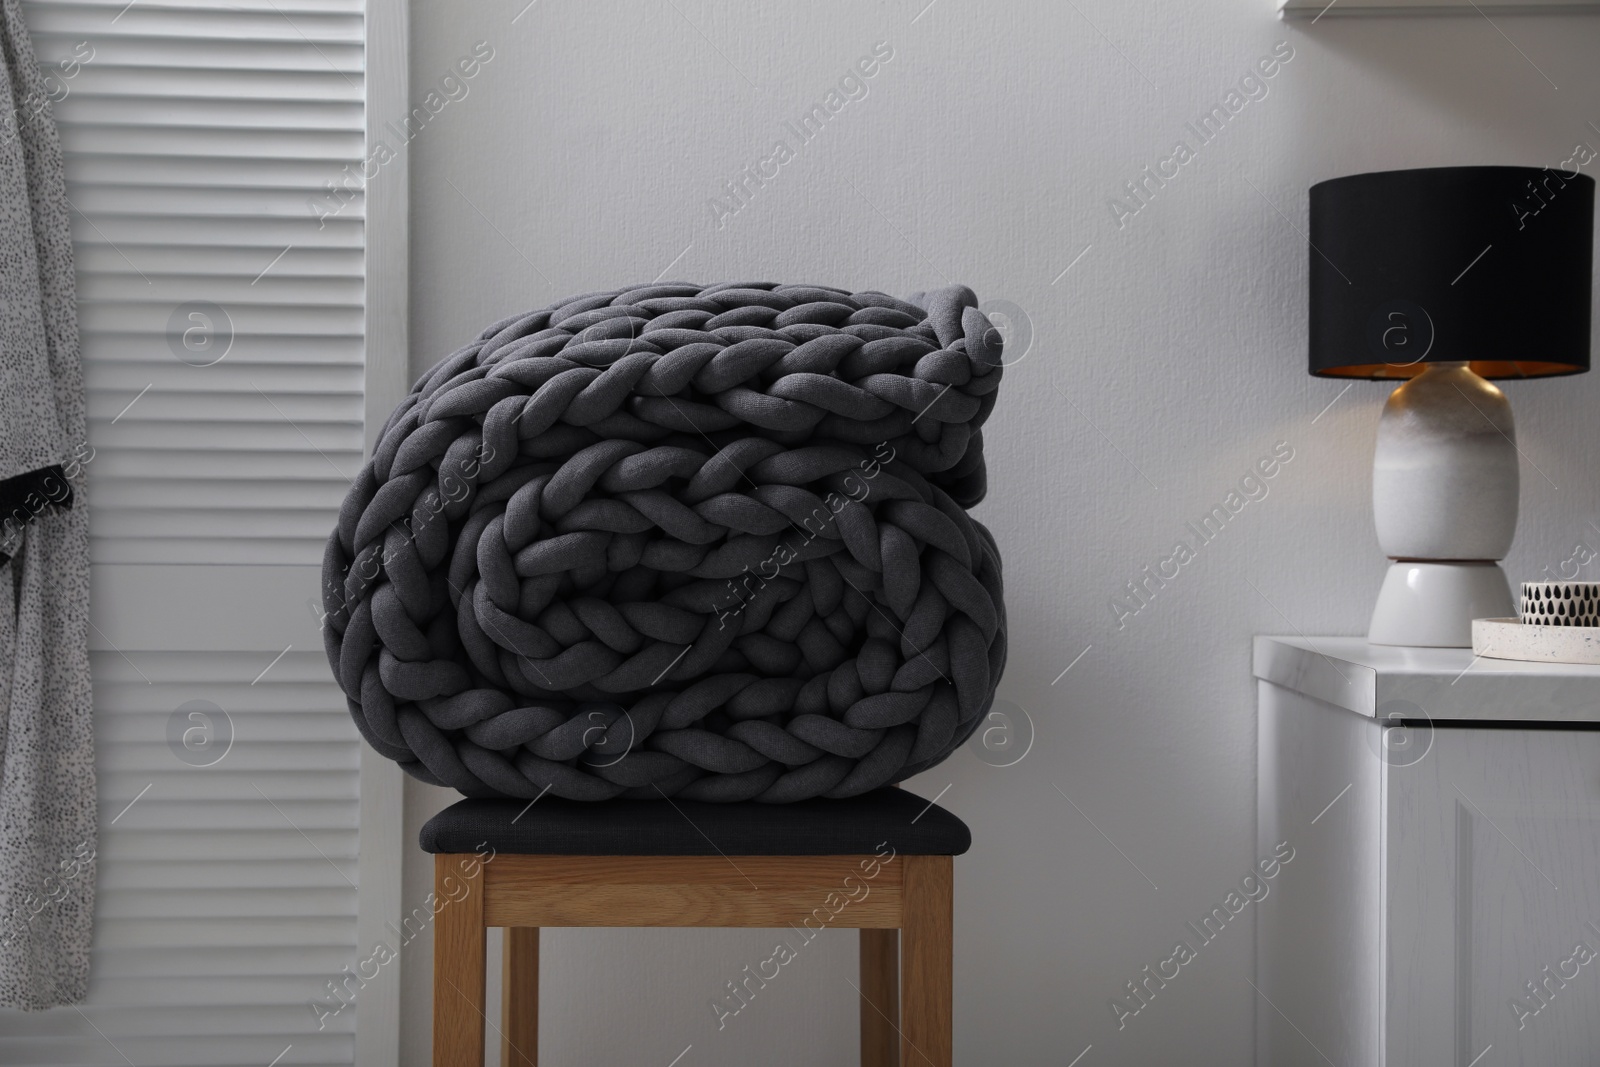 Photo of Dark grey chunky knit blanket rolled on wooden stool in room